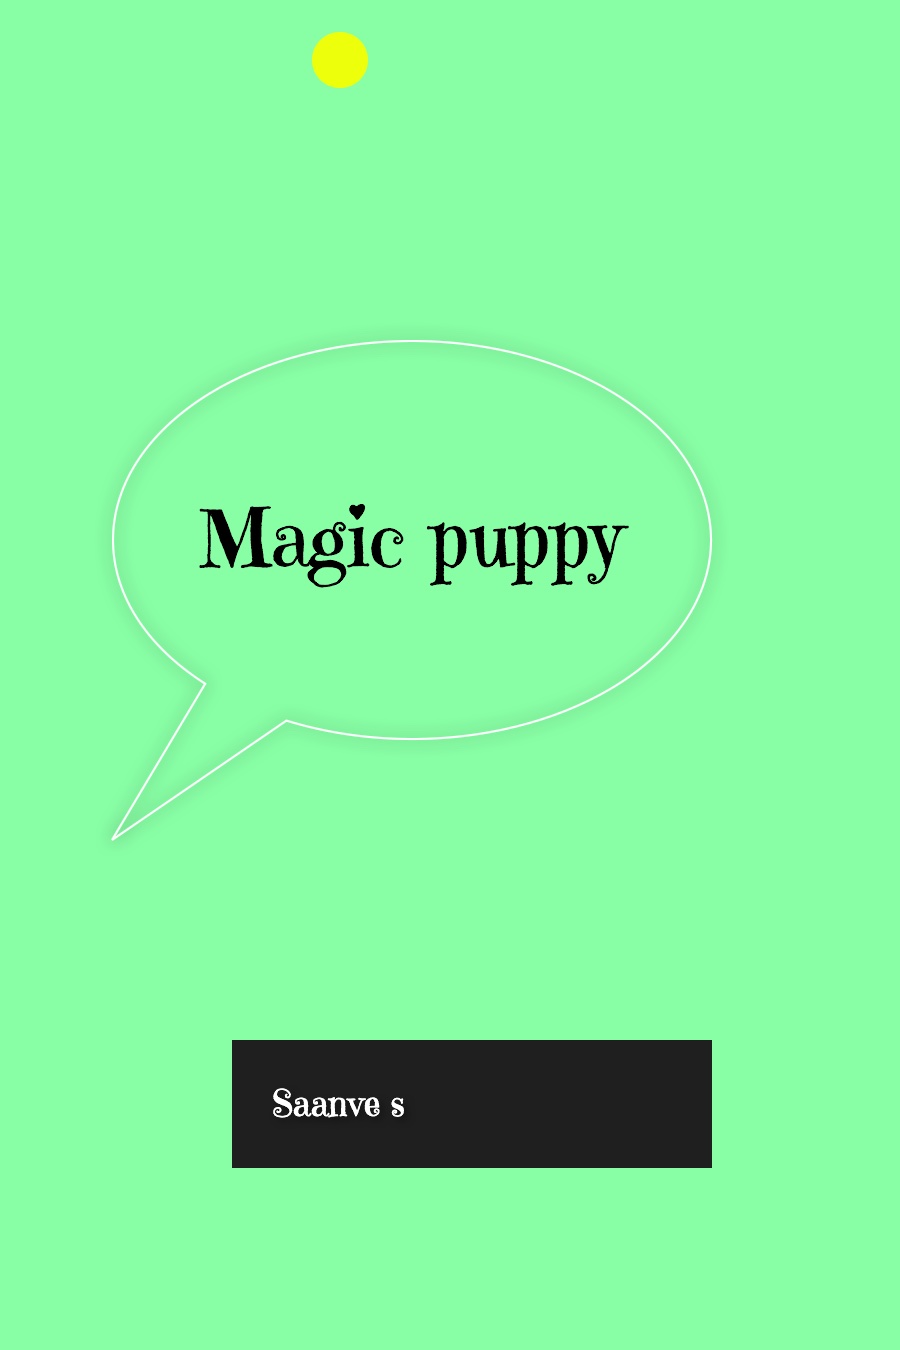 Magic Puppy by Saanve S